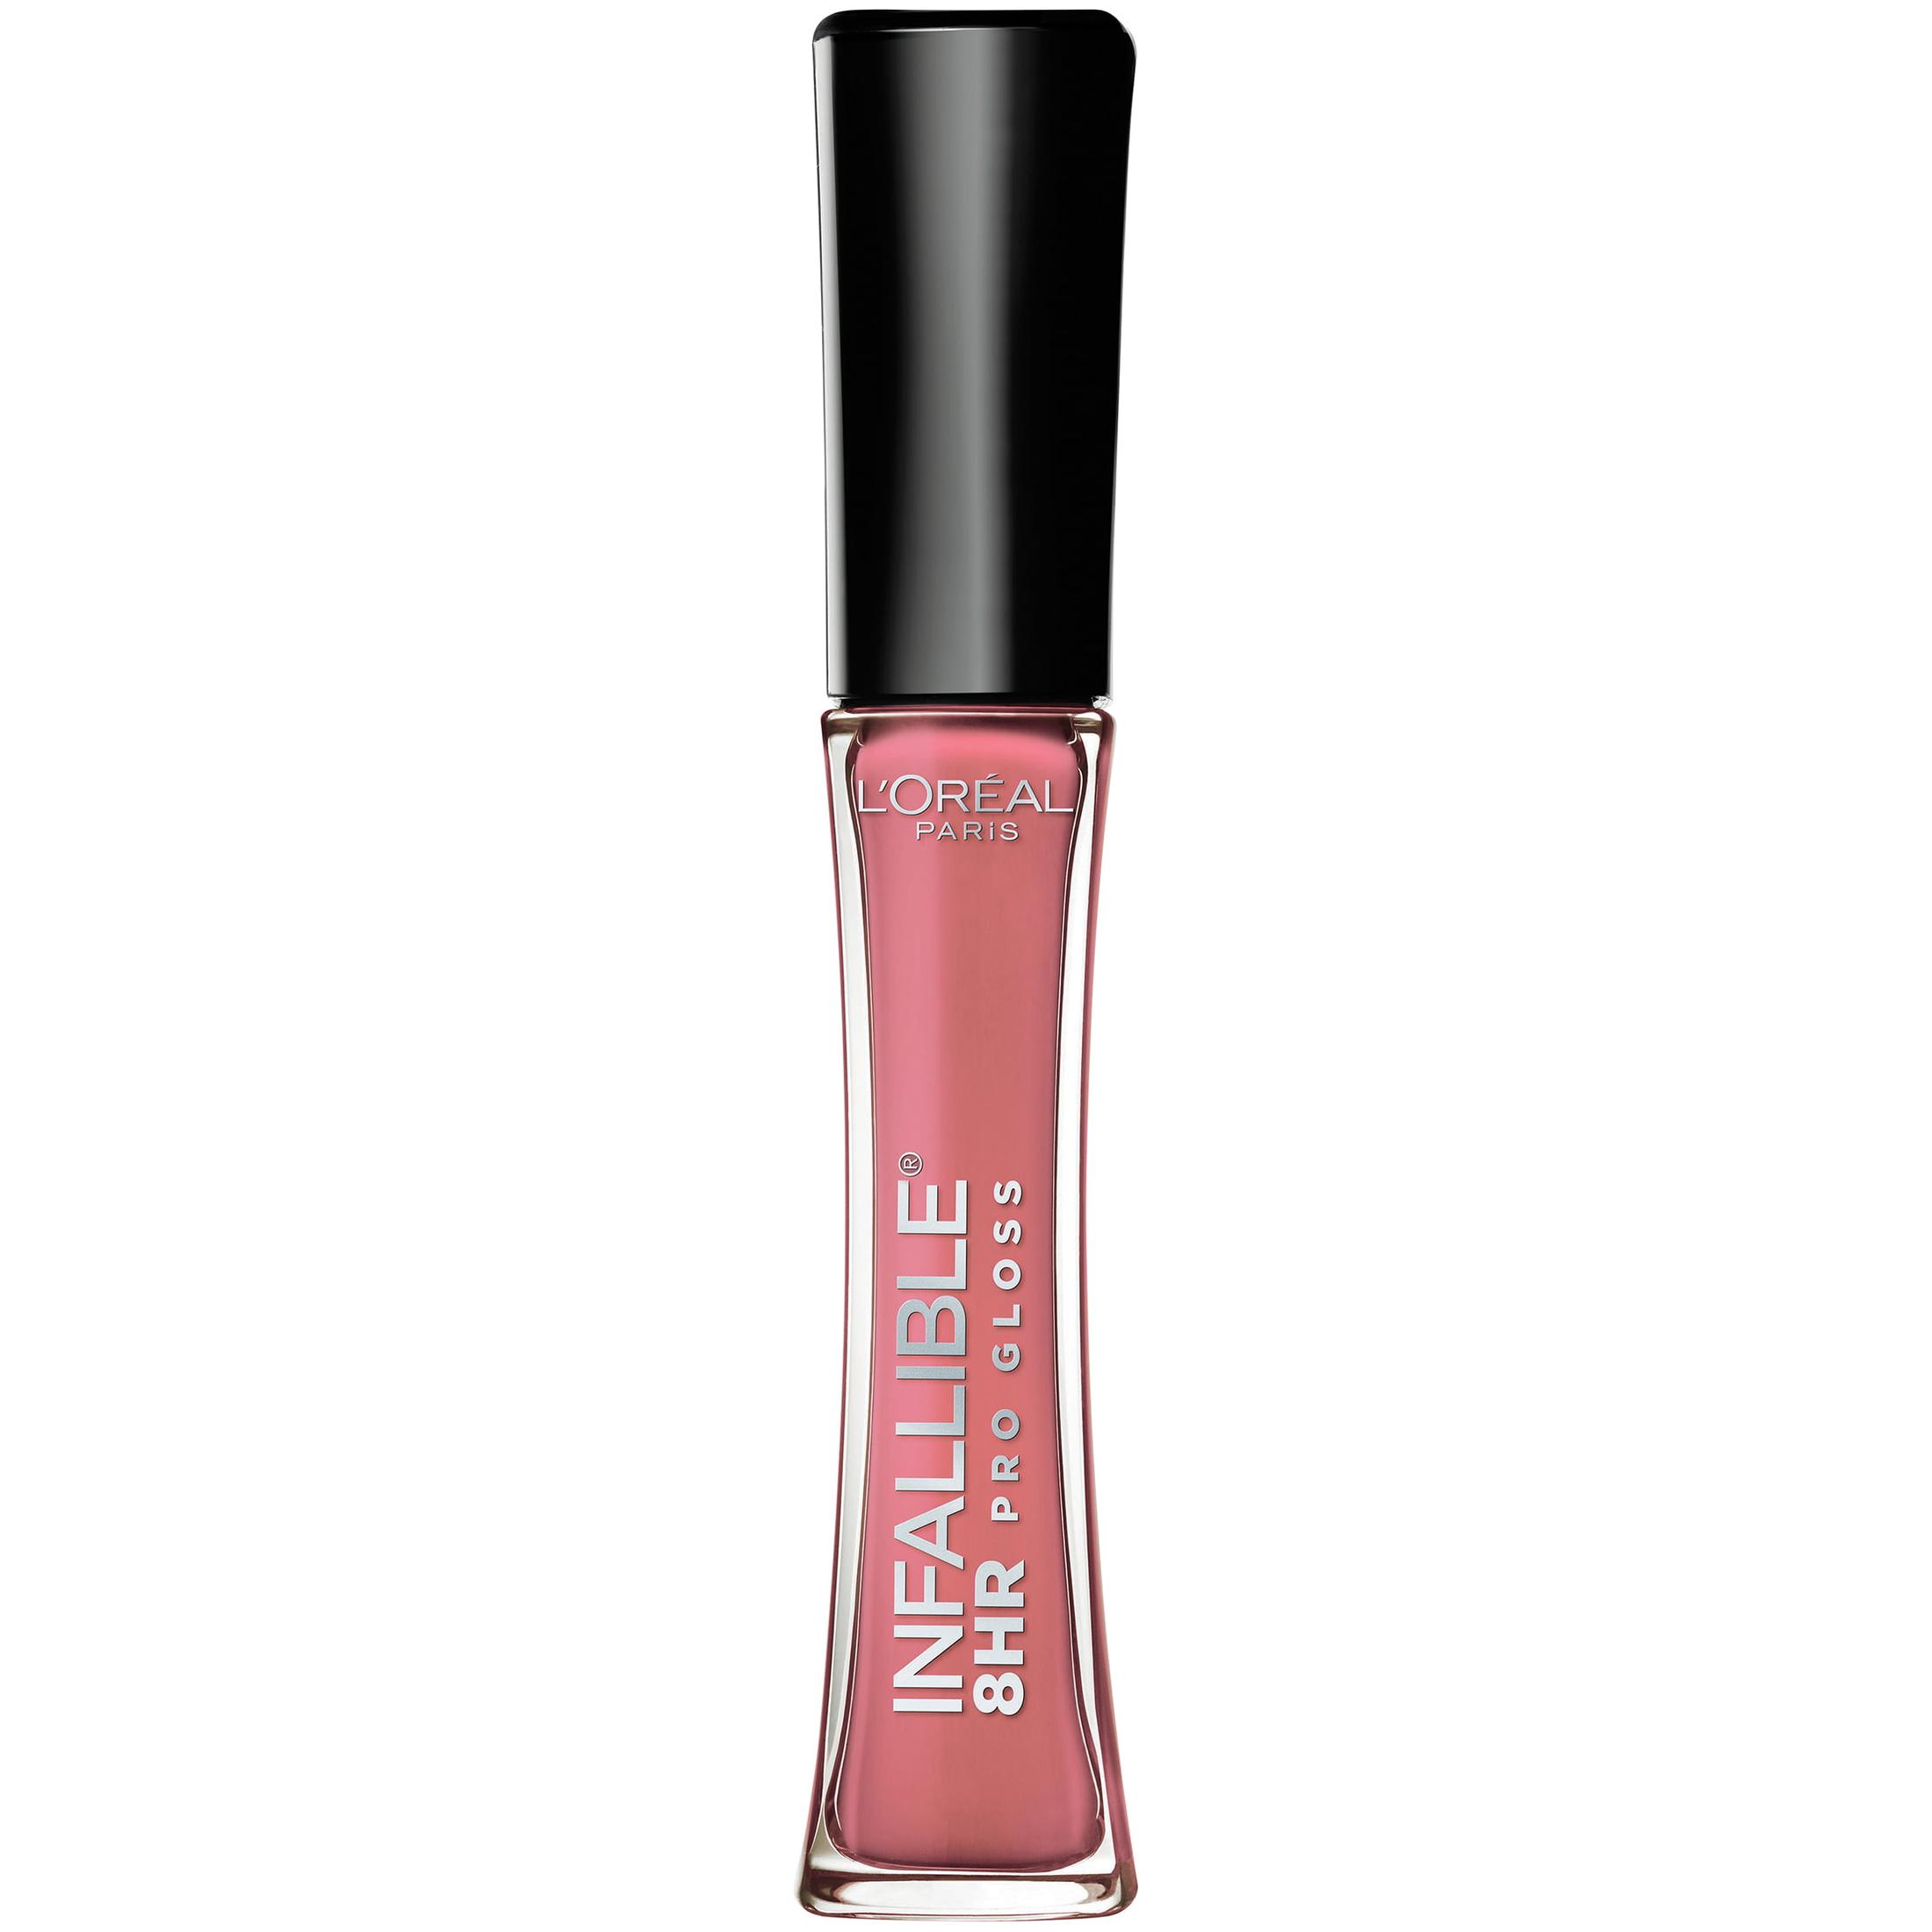 L'Oreal Paris Infallible 8 Hour Pro Hydrating Lip Gloss, Blush - image 1 of 5